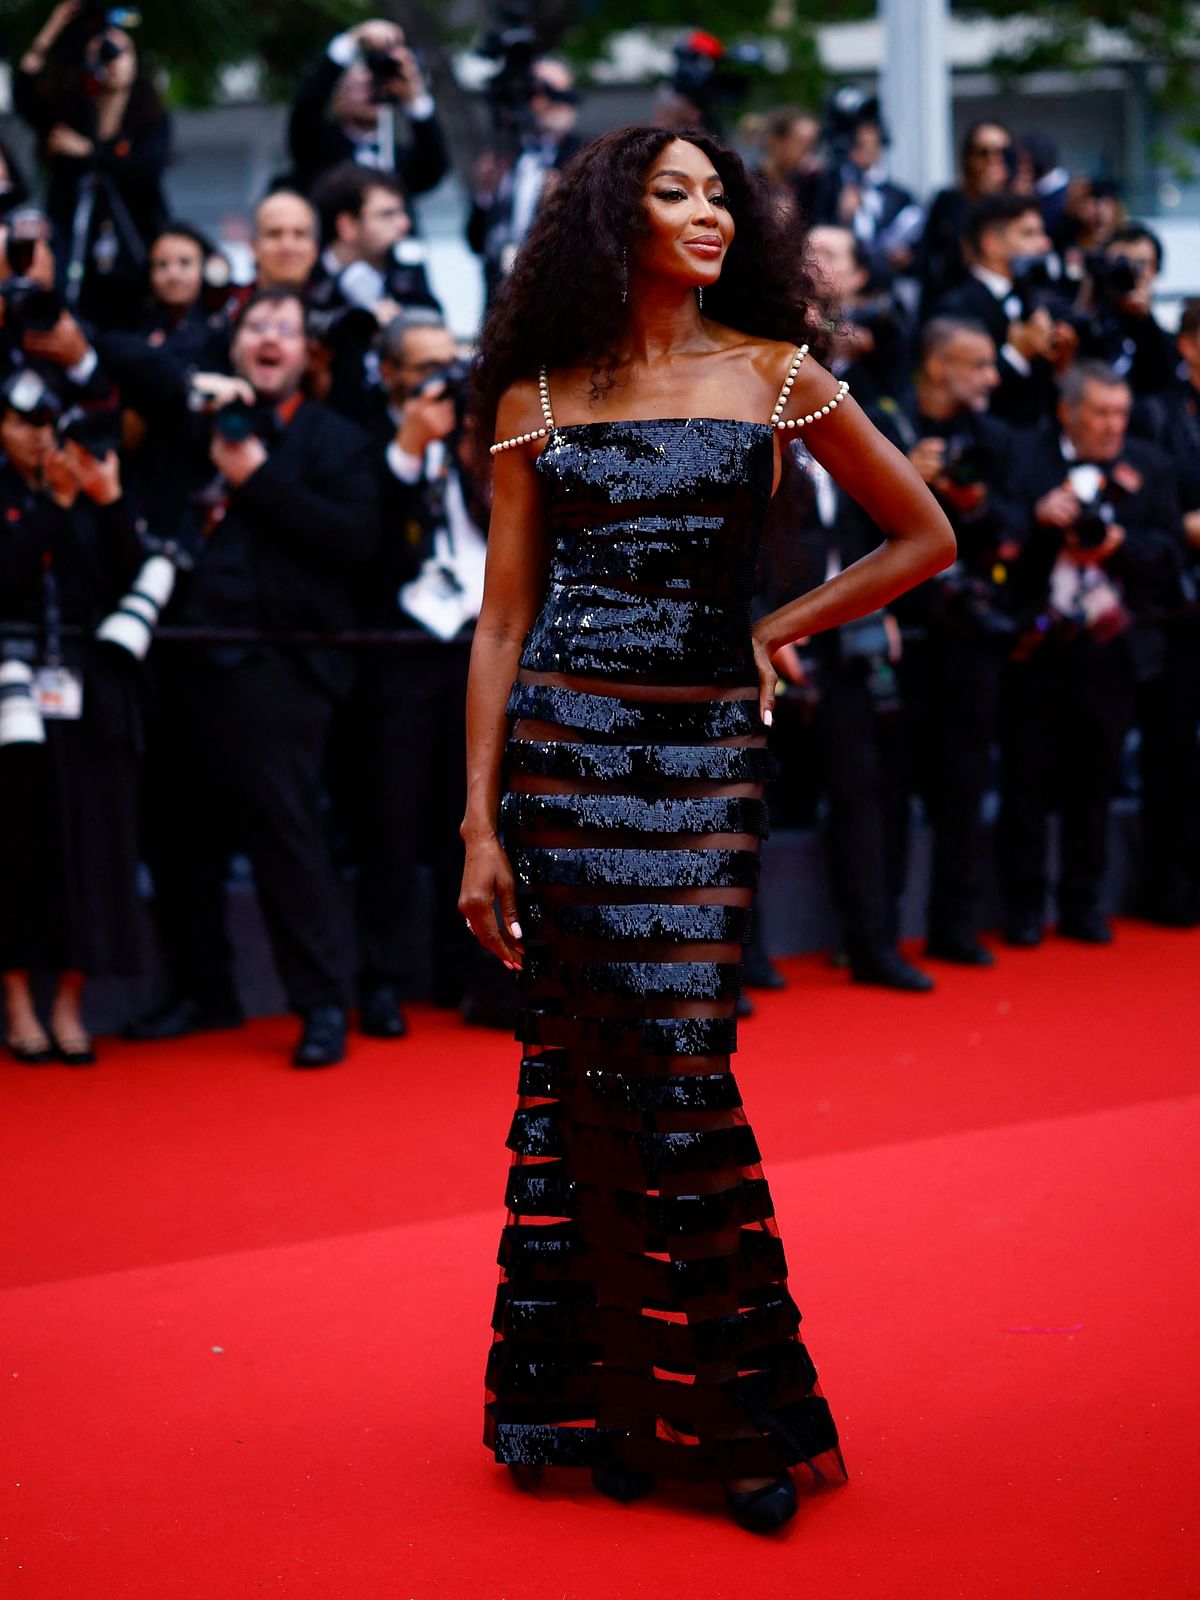 Hollywood diva Naomi Campbell wowed all in a dark blue sparking attire.